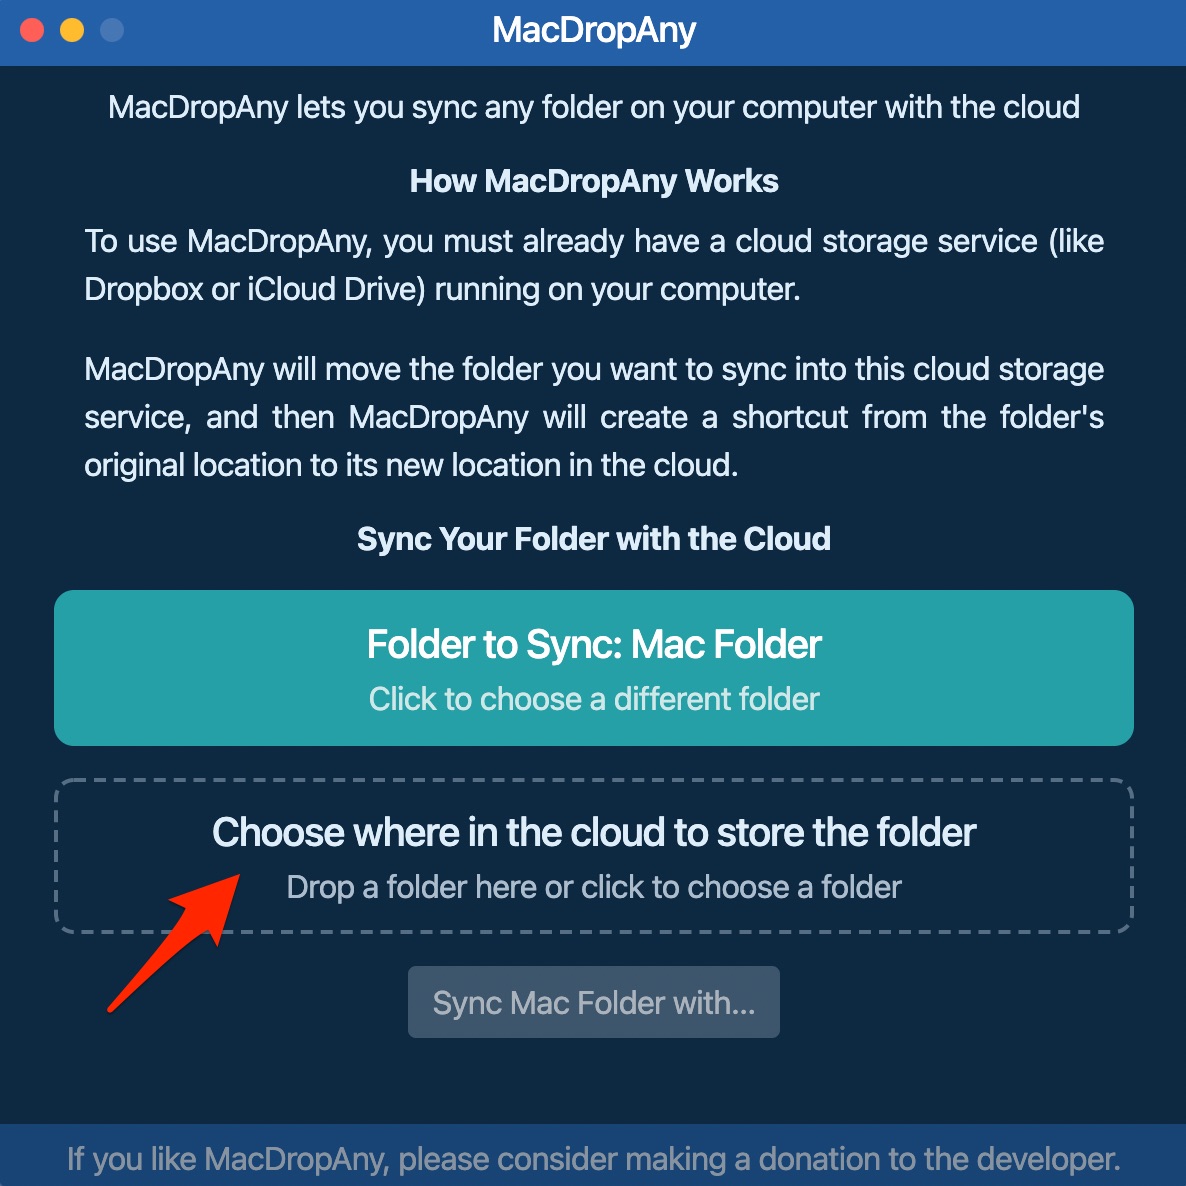 Choose where in the cloud to store the folder